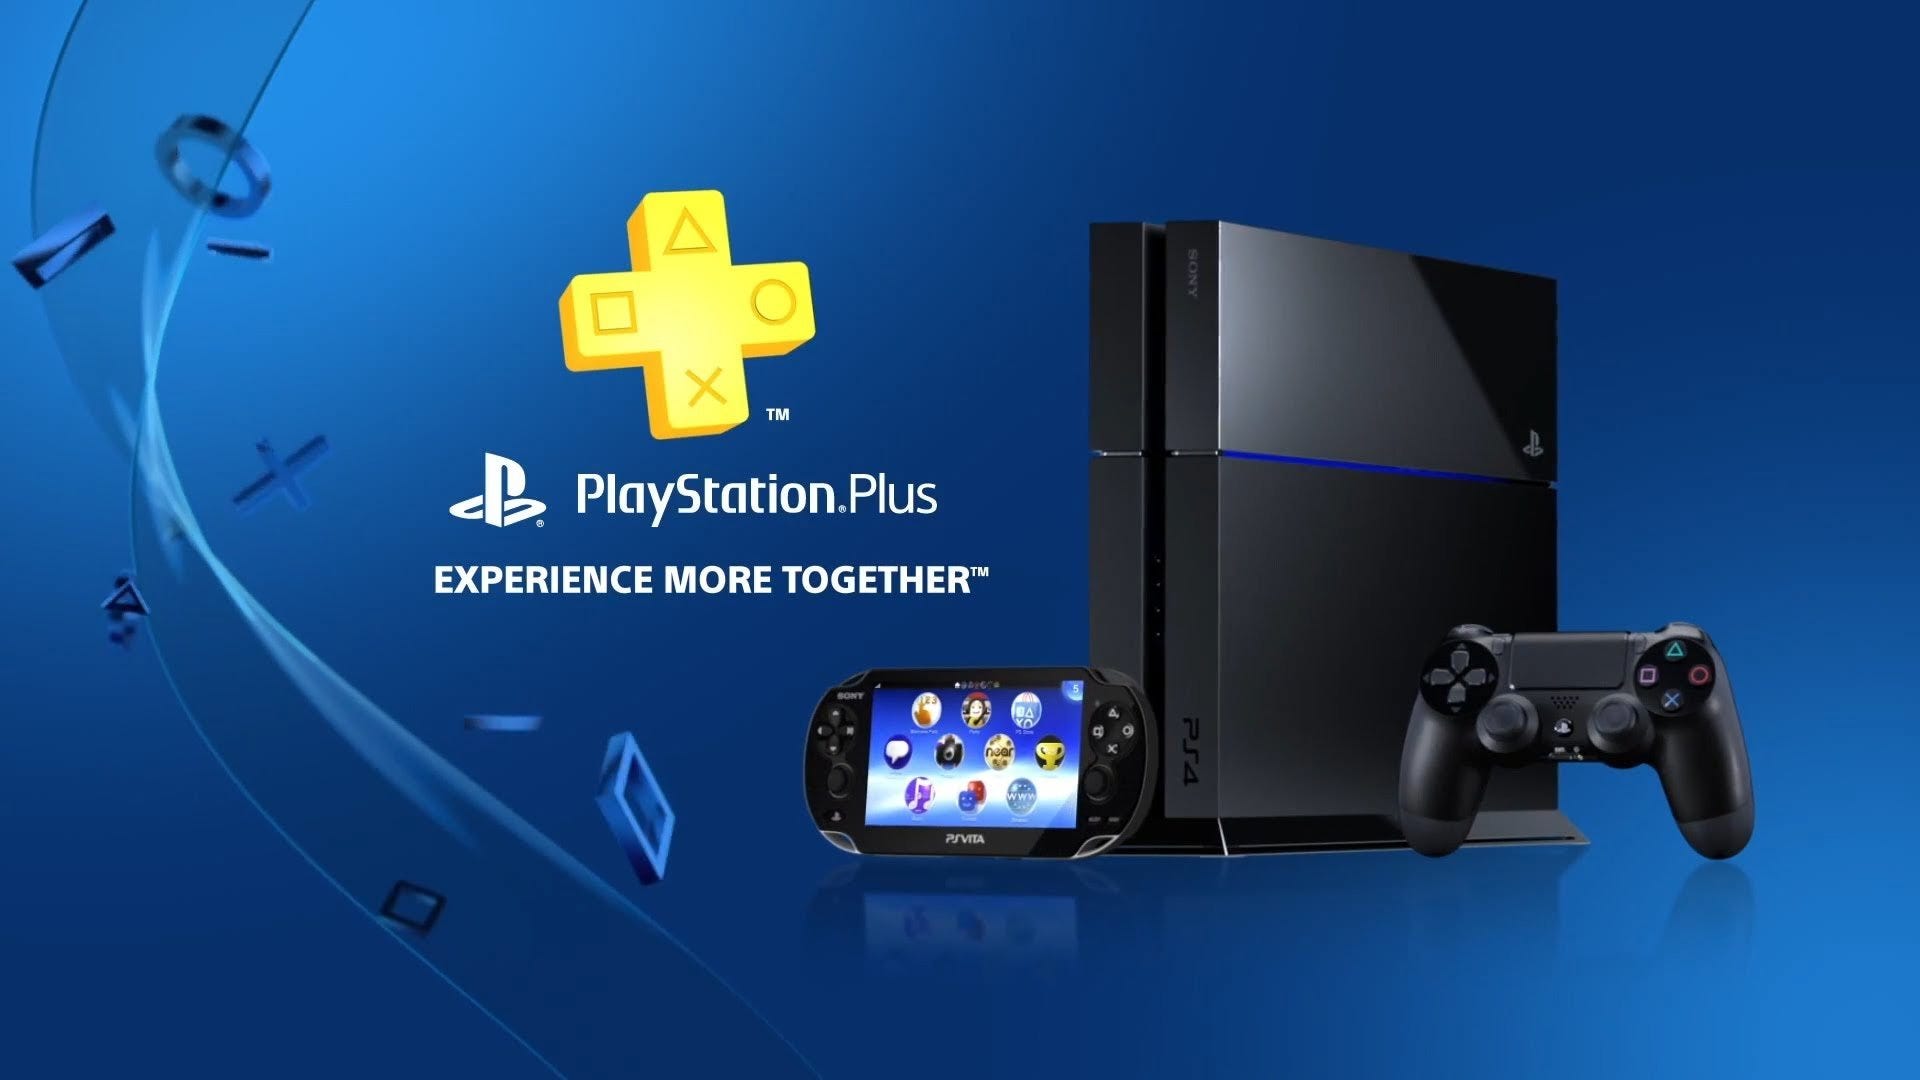 playstation plus ps3 free games